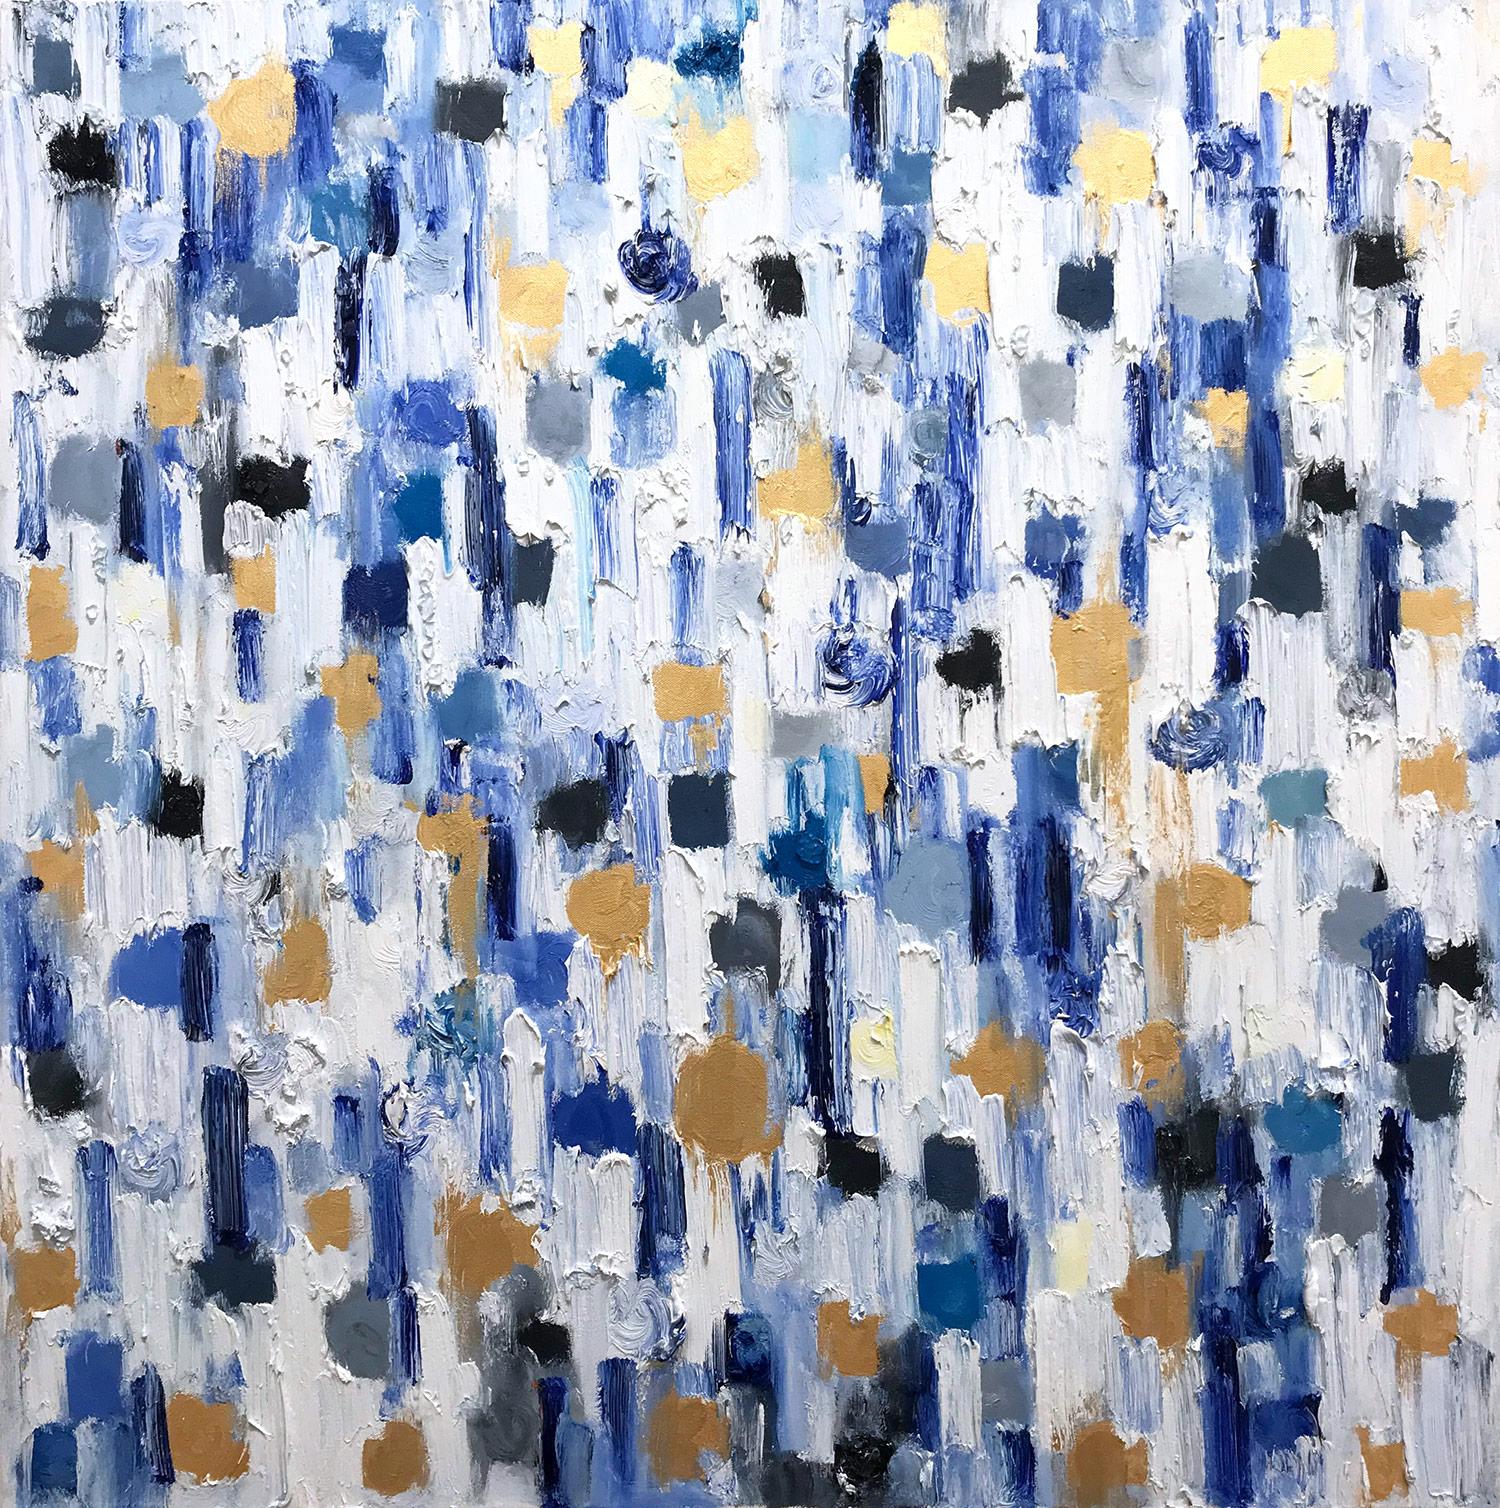 Cindy Shaoul Abstract Painting - Dripping Dots - Crete Greece, Colorful, Abstract, Oil Painting